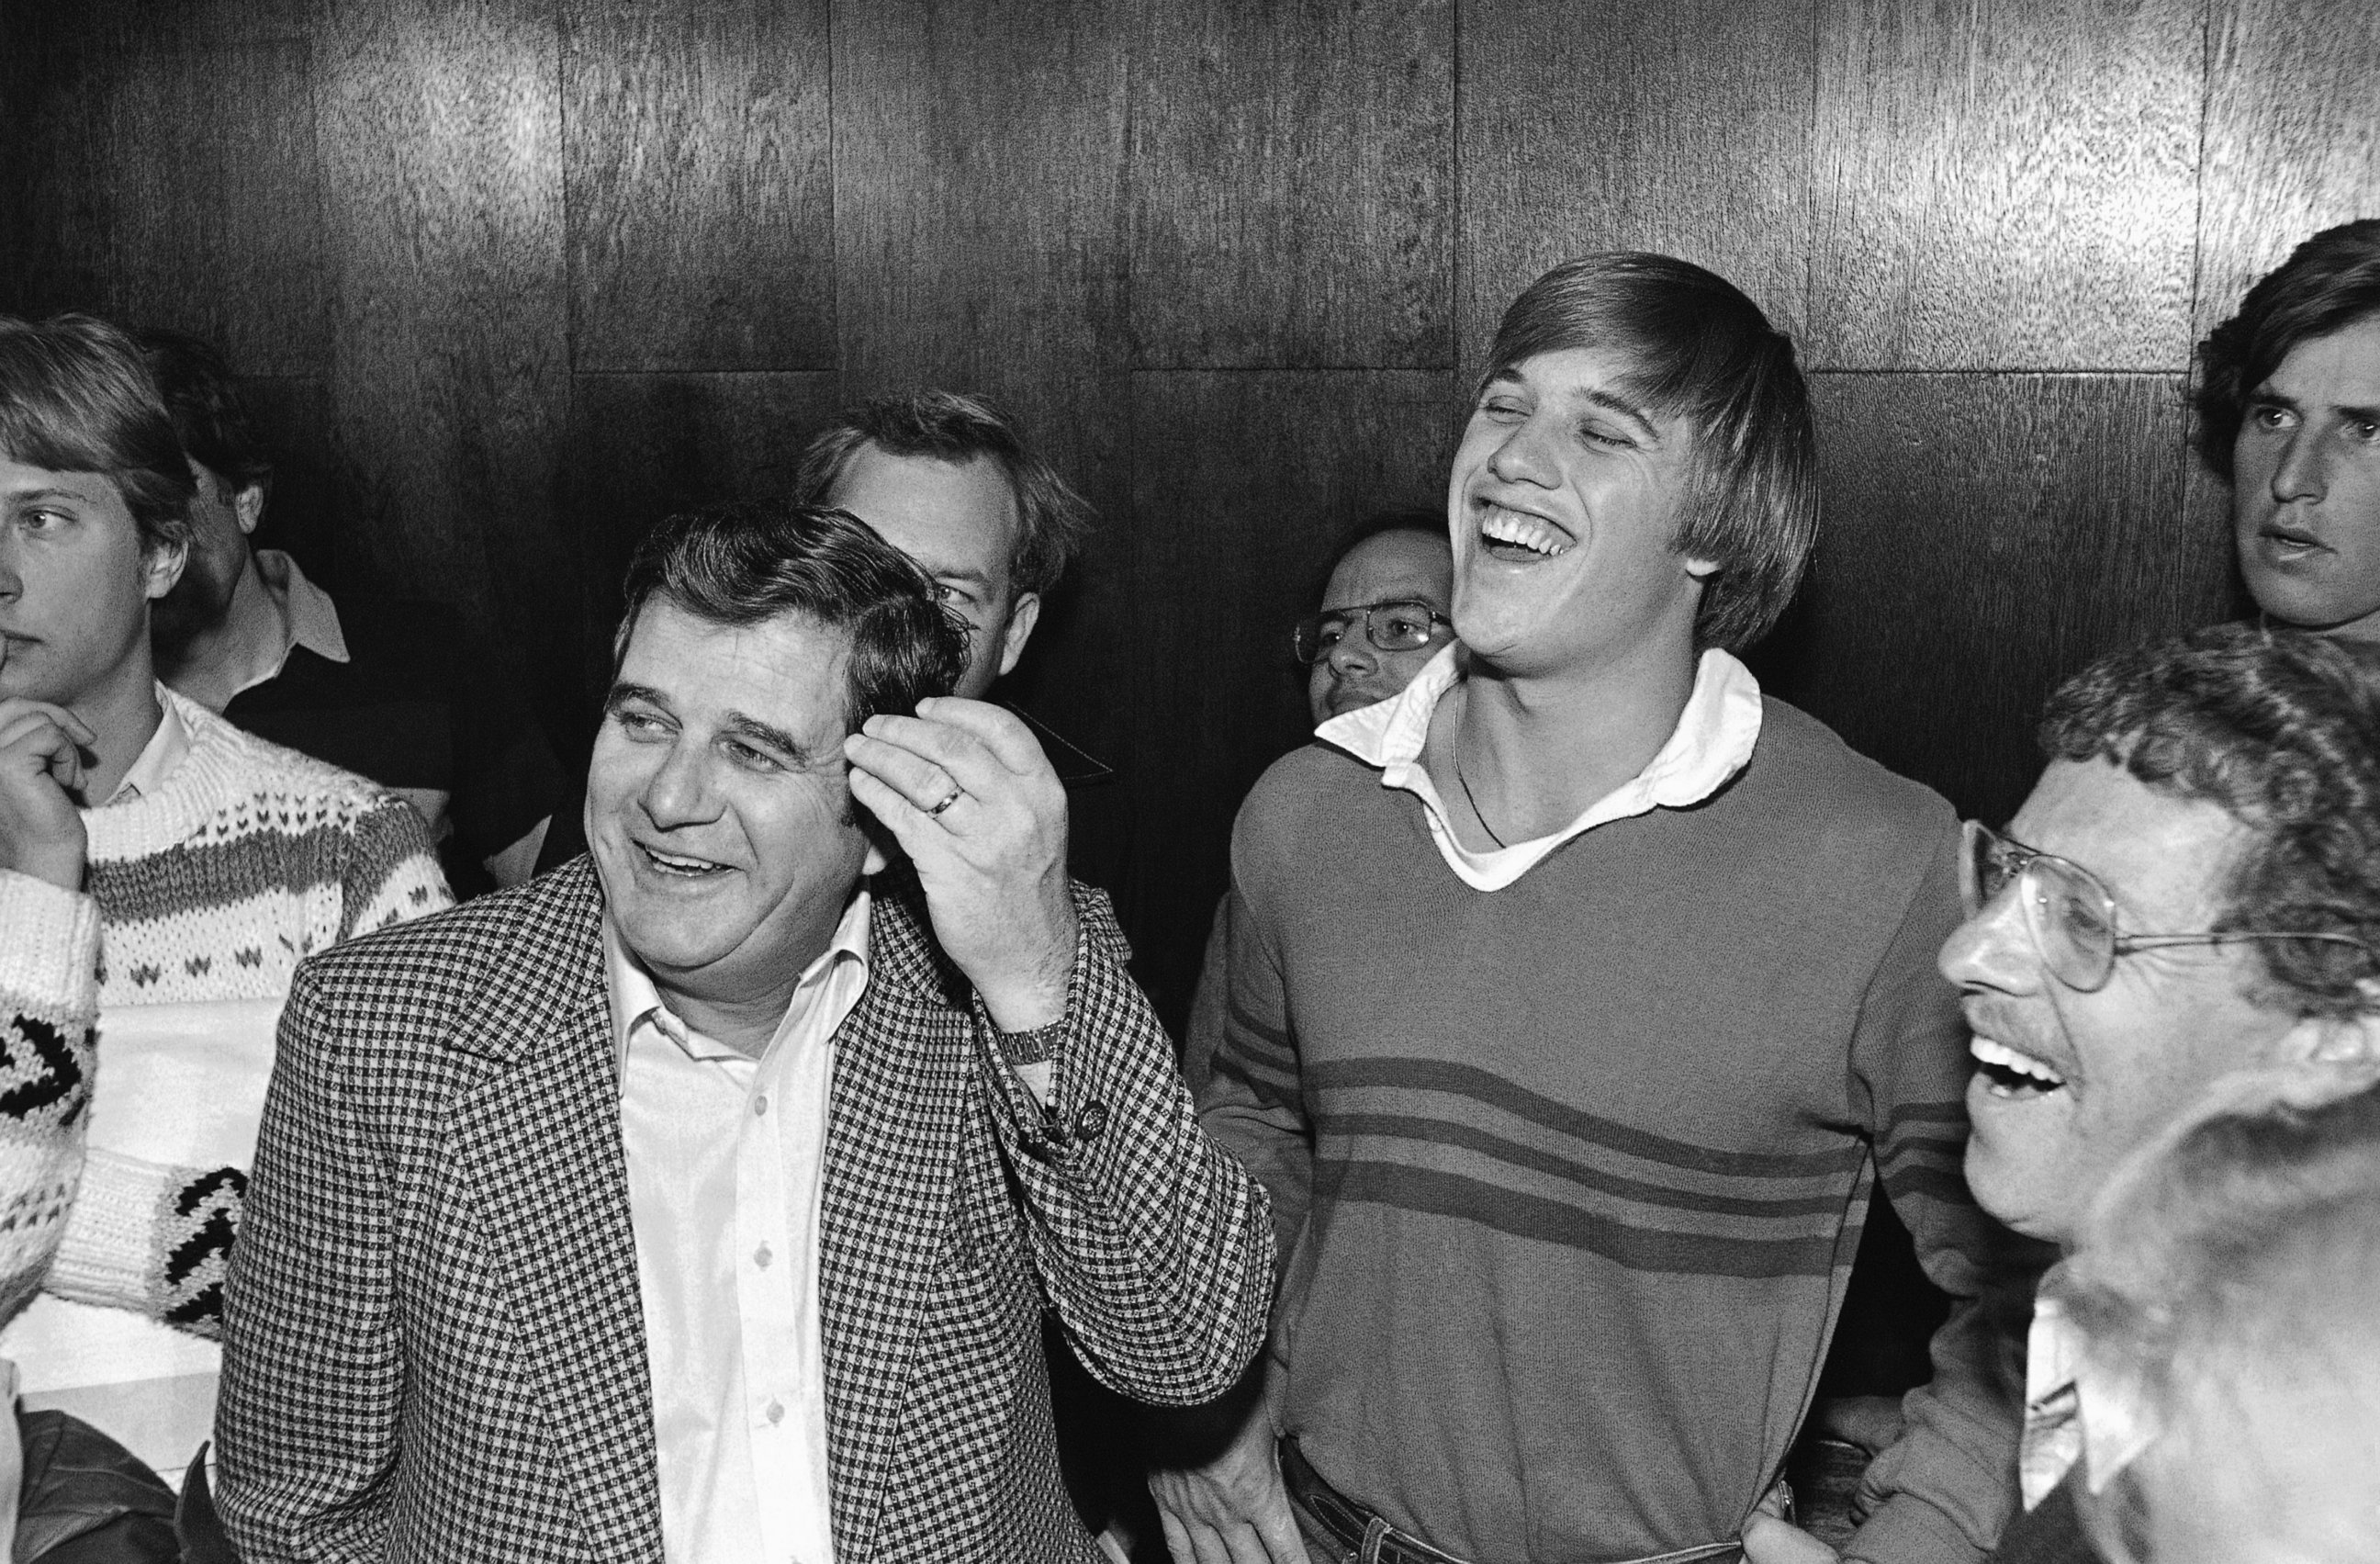 PHOTO: Stanford University quarterback John Elway, right, laughs with his father Jack Elway during a press conference in afternoon on Tuesday, April 26, 1983 in San Jose, Calif.